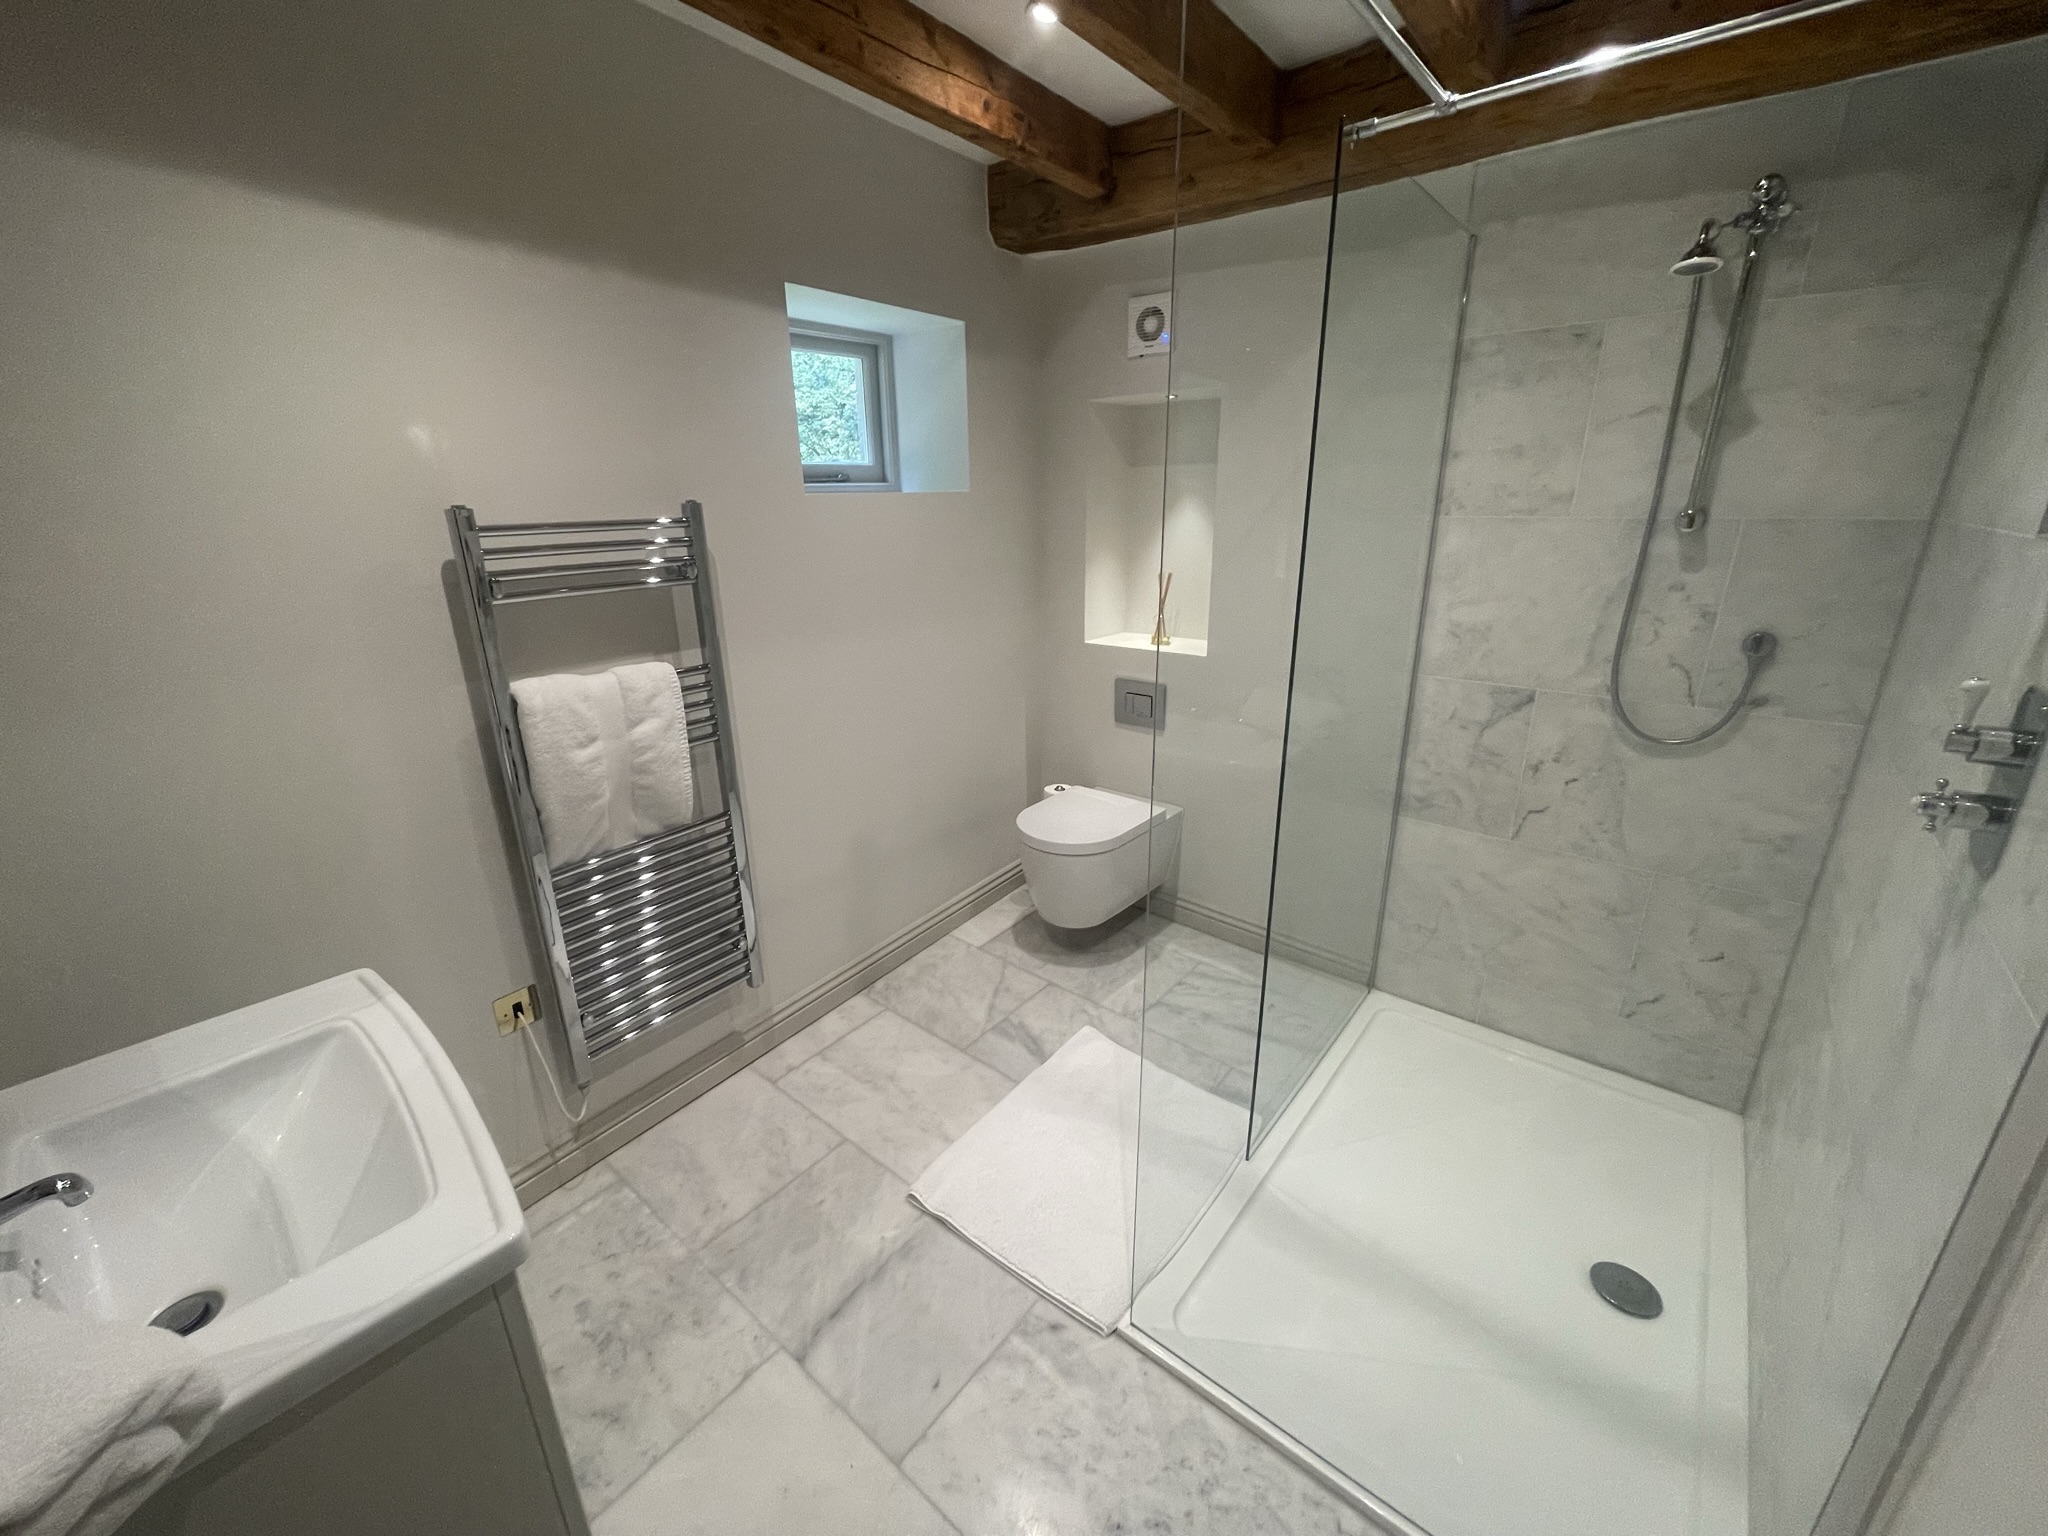 Downstairs Shower Room with walk in shower, basin and WC